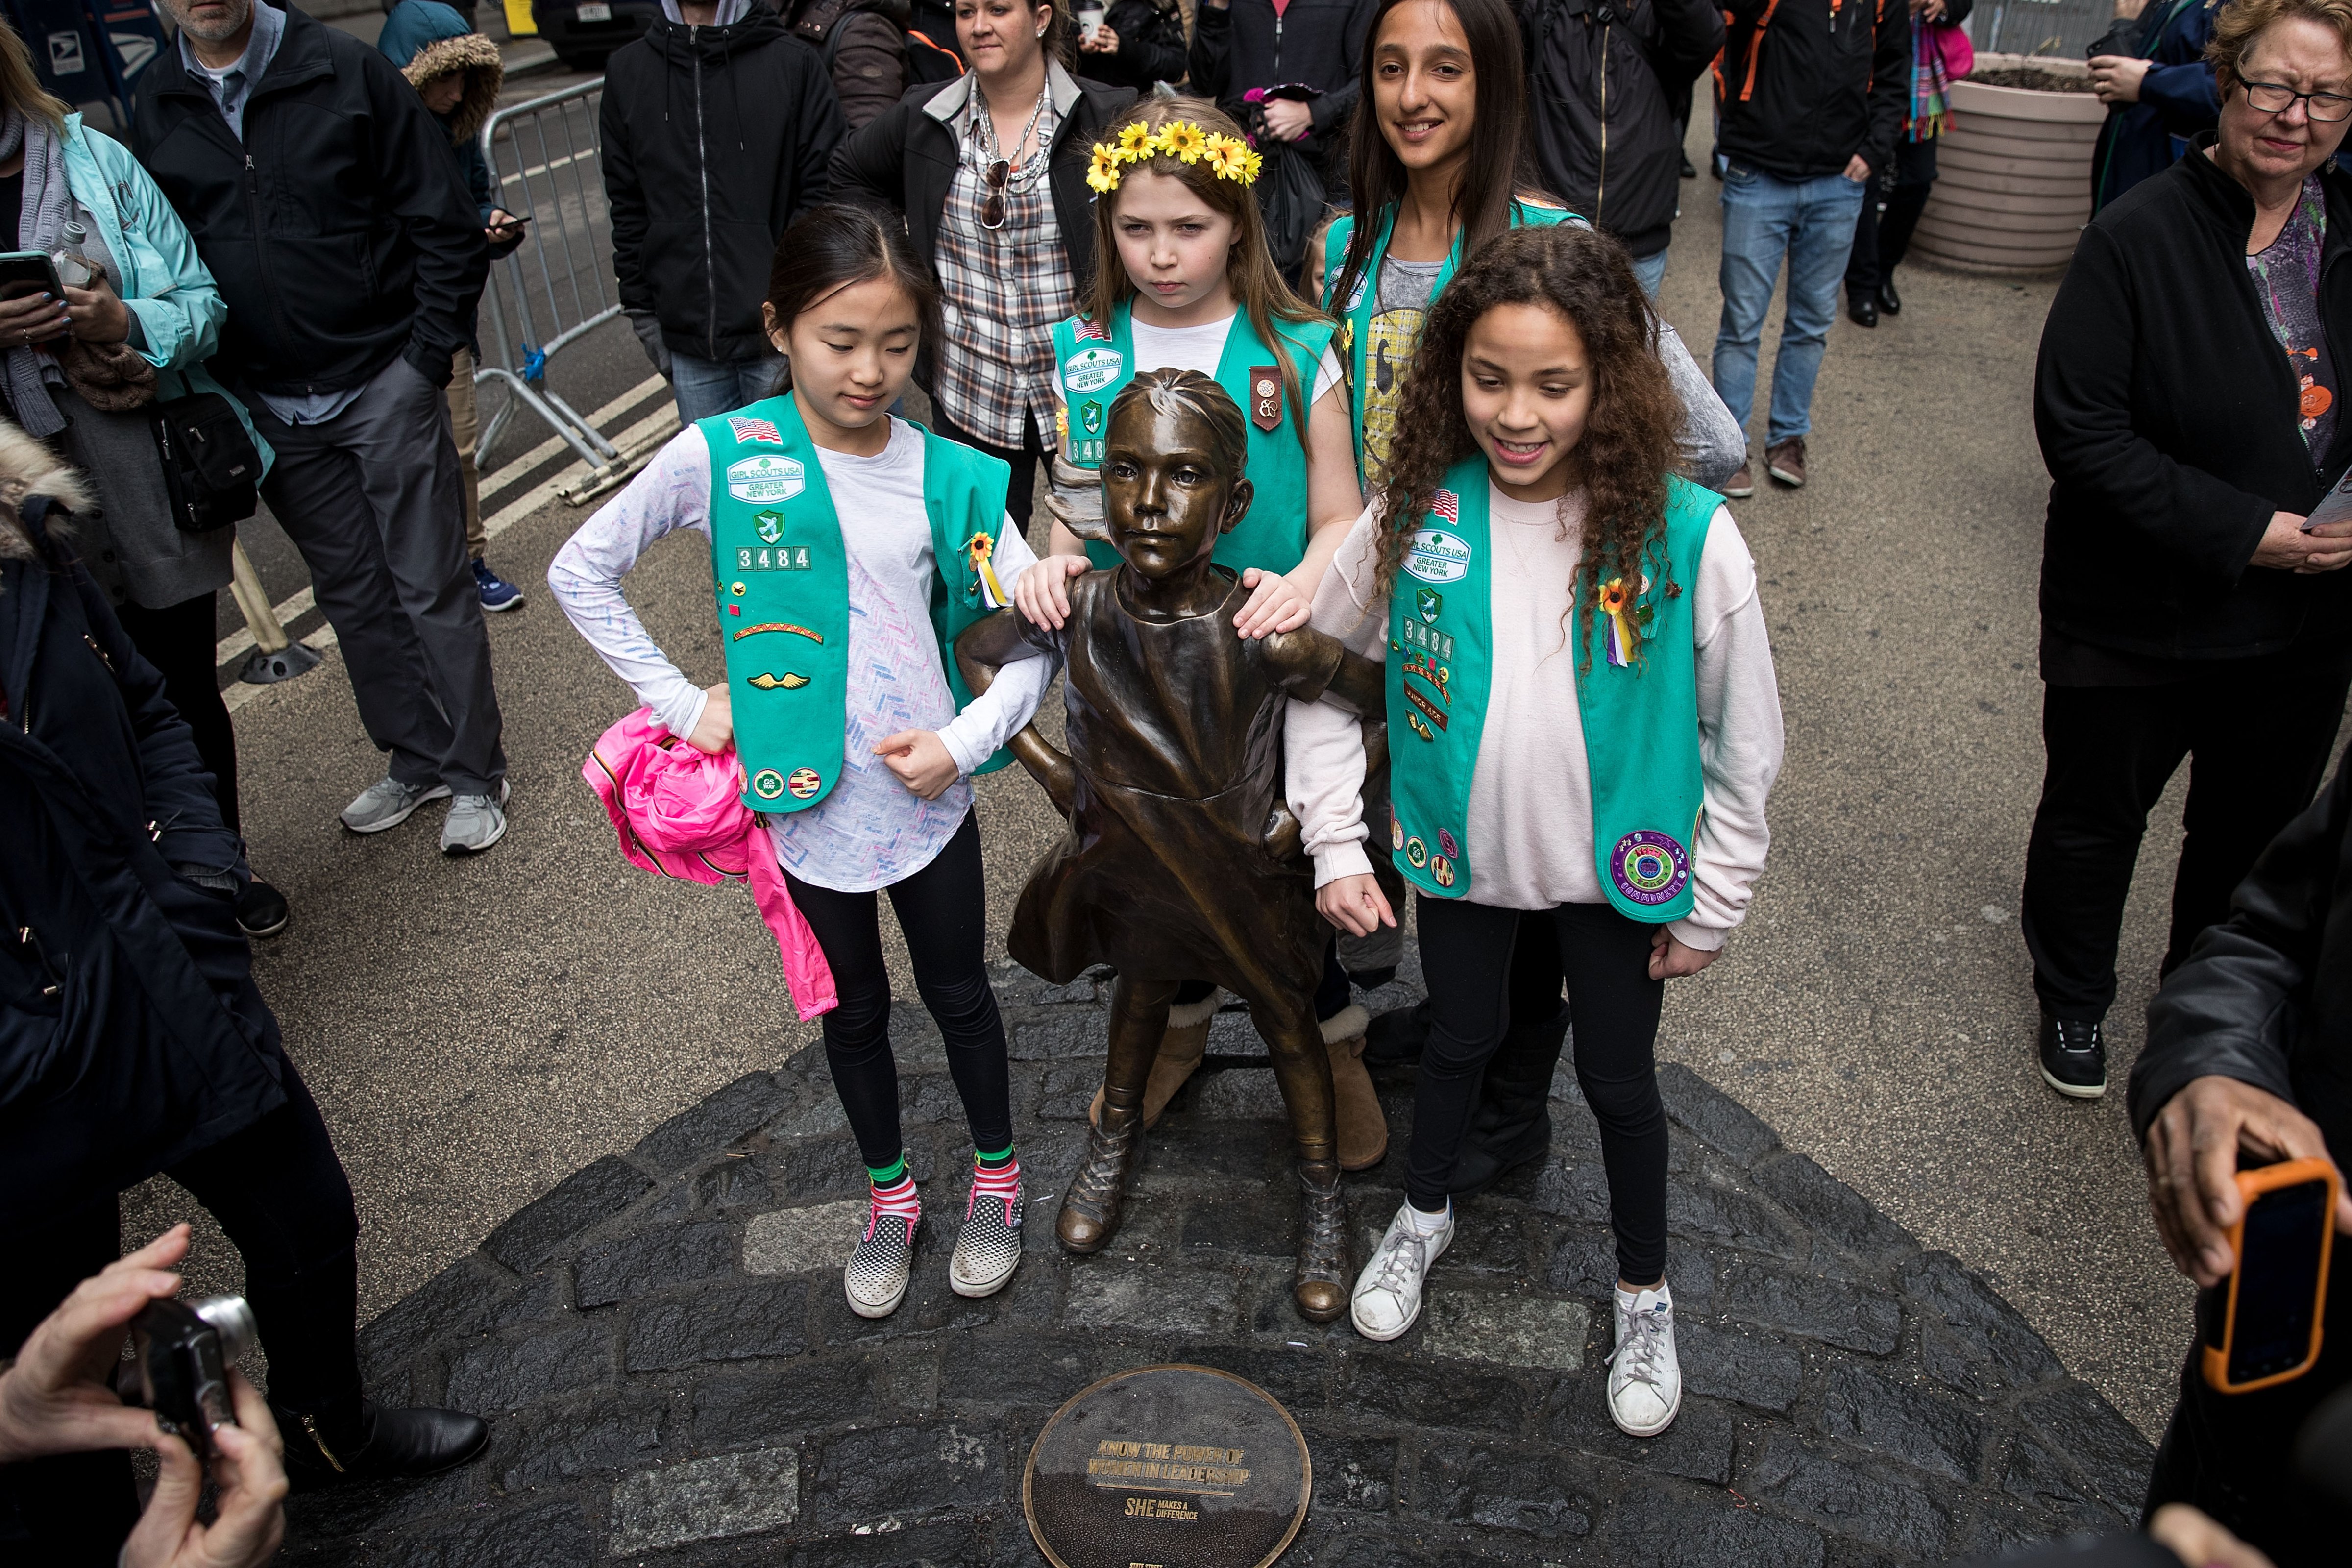 Young members of Girl Scout troop 3484 pose for photos with the 'Fearless Girl' statue, March 27, 2017 in New York City. (Photograph by Drew Angerer—Getty)